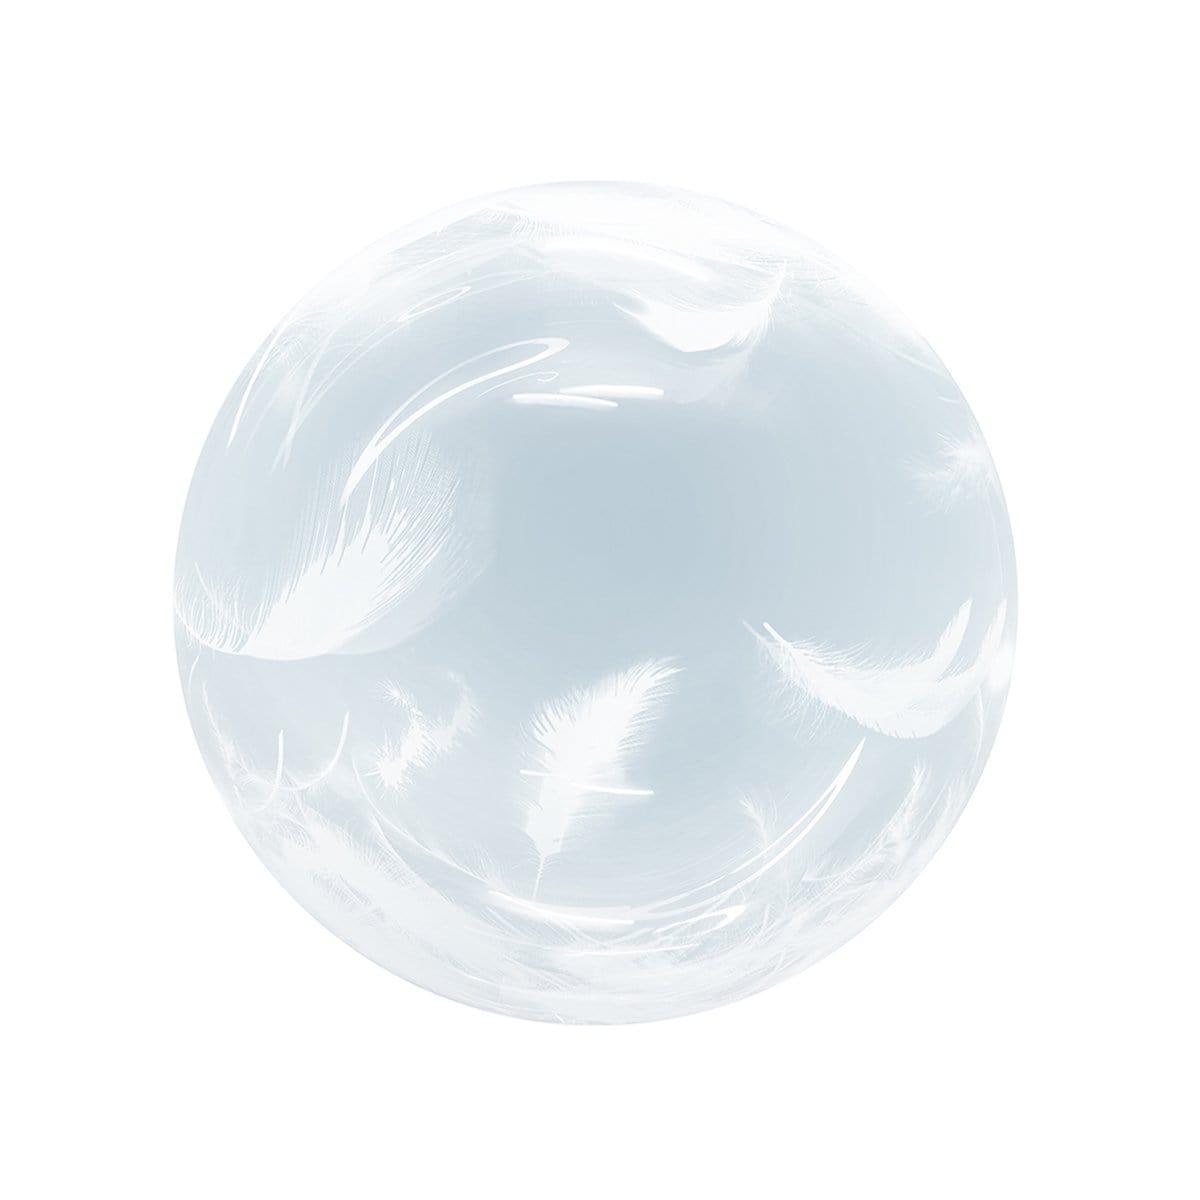 Buy Balloons Bubble Balloon, White Feathers, 18 Inches sold at Party Expert